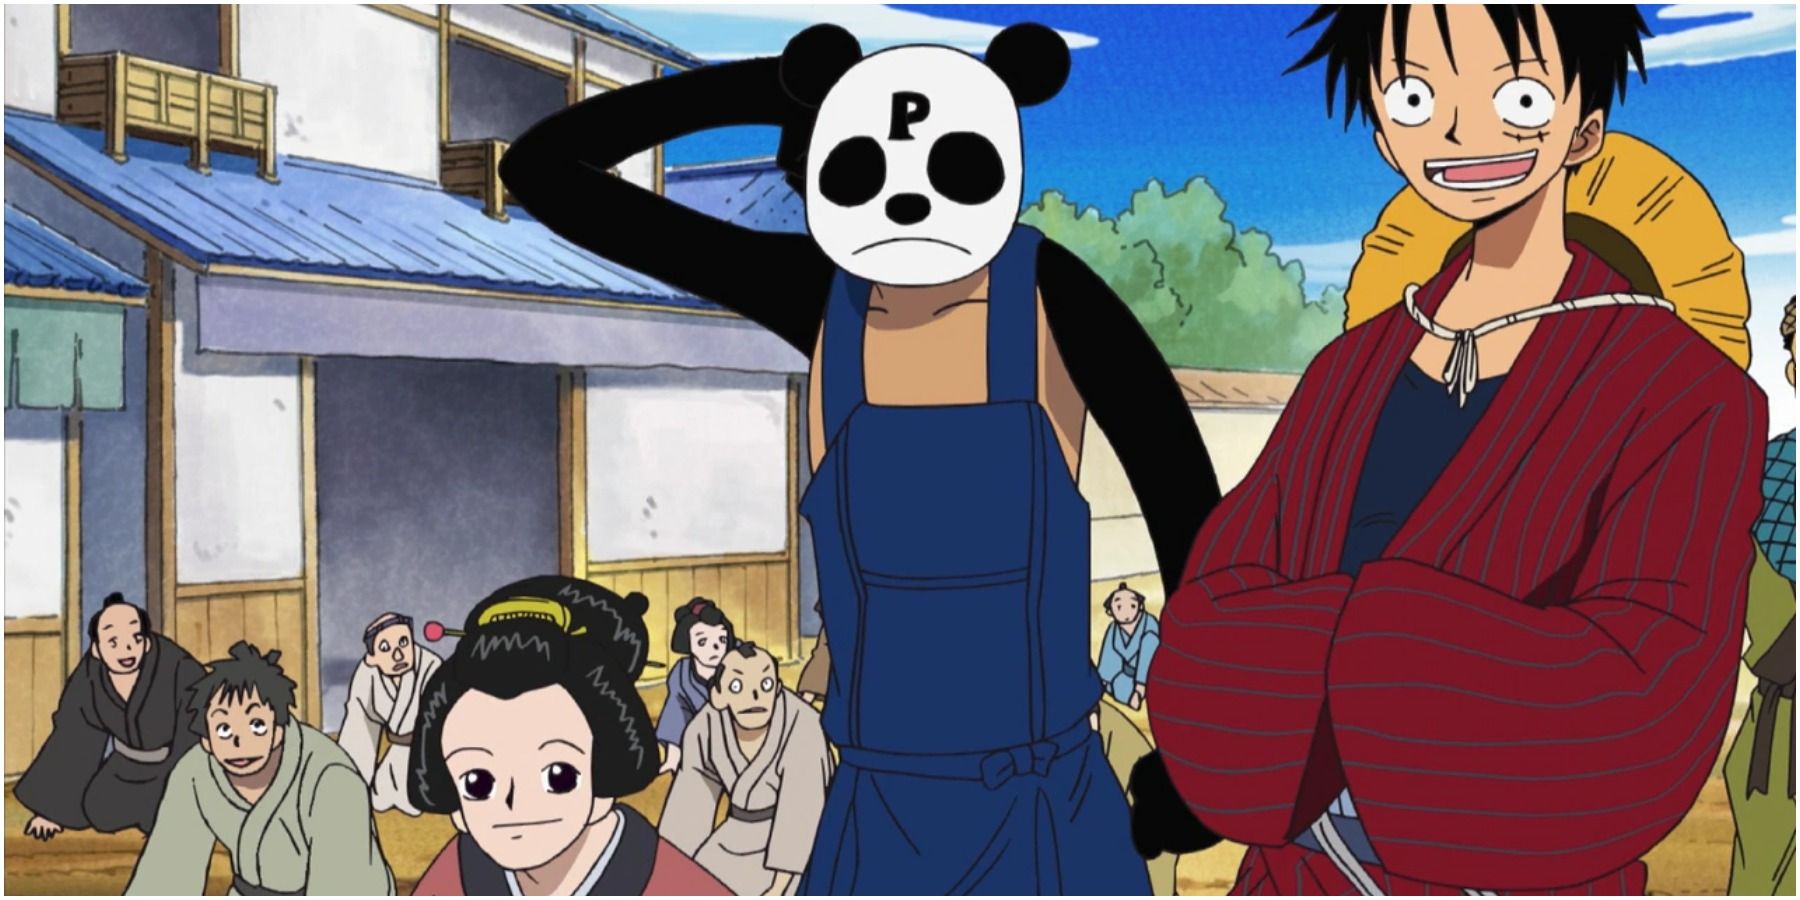 Pandaman In Wano With Luffy